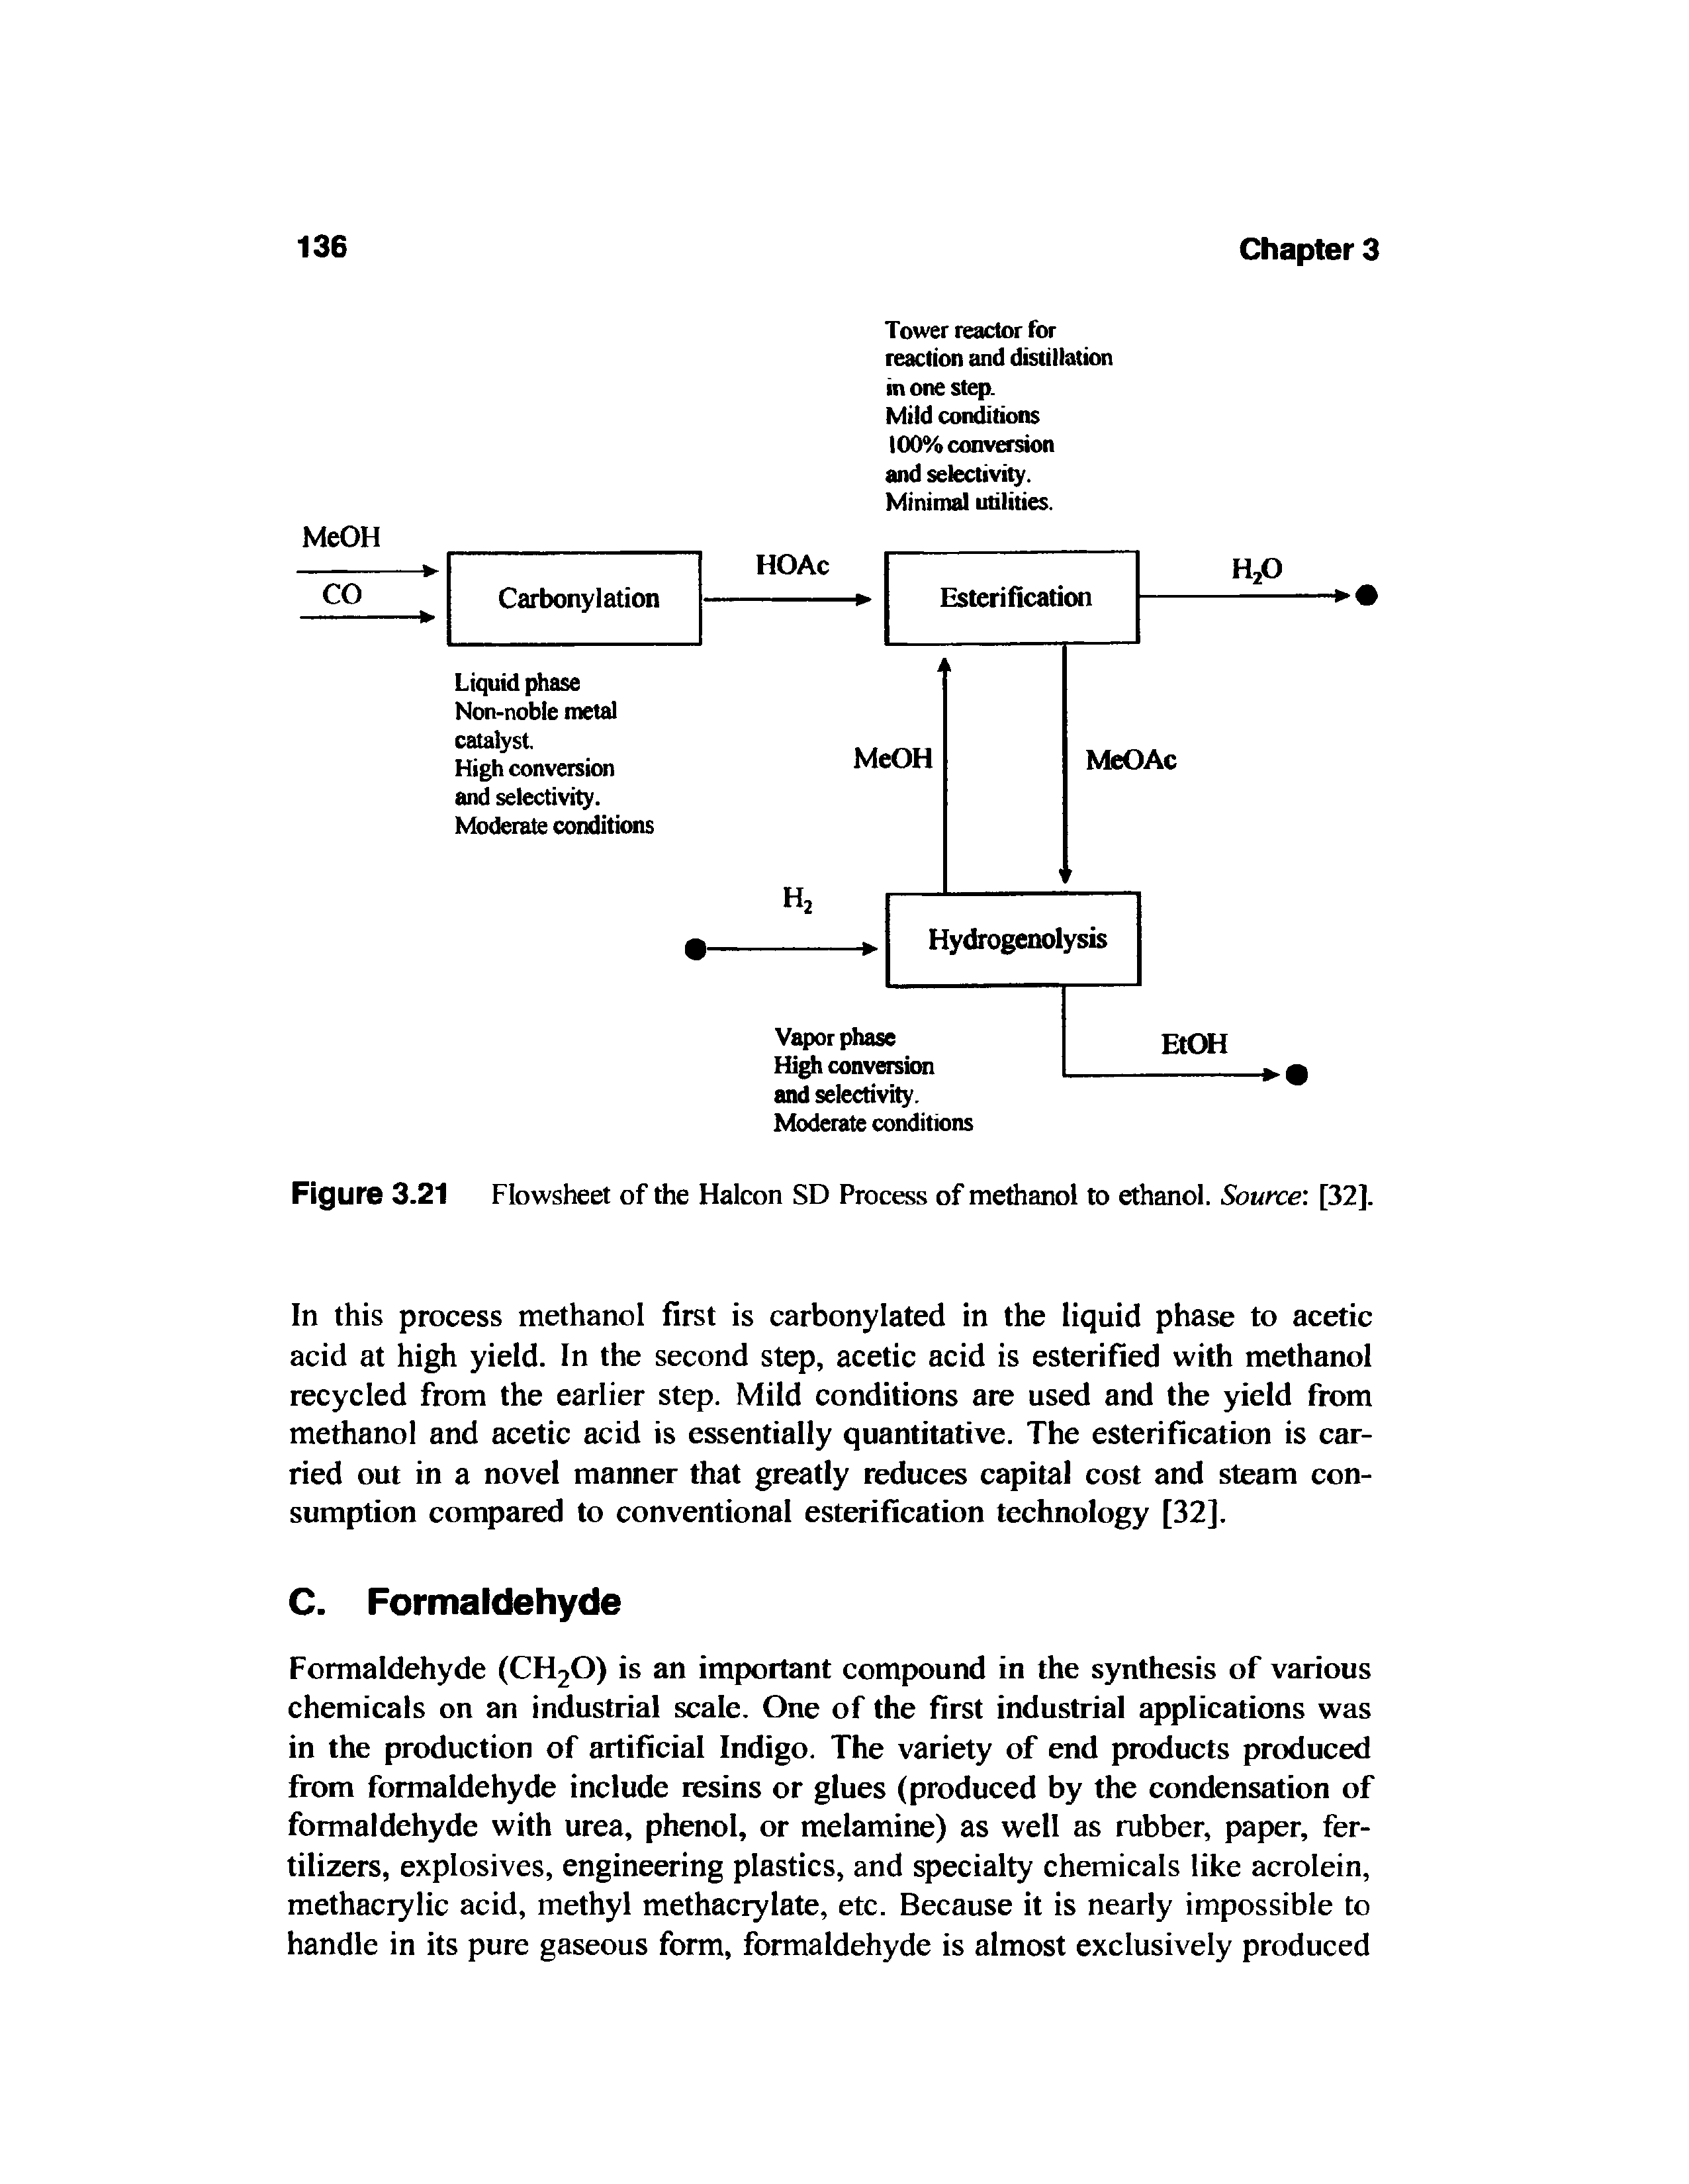 Figure 3.21 Flowsheet of the Halcon SD Process of methanol to ethanol. Source [32].